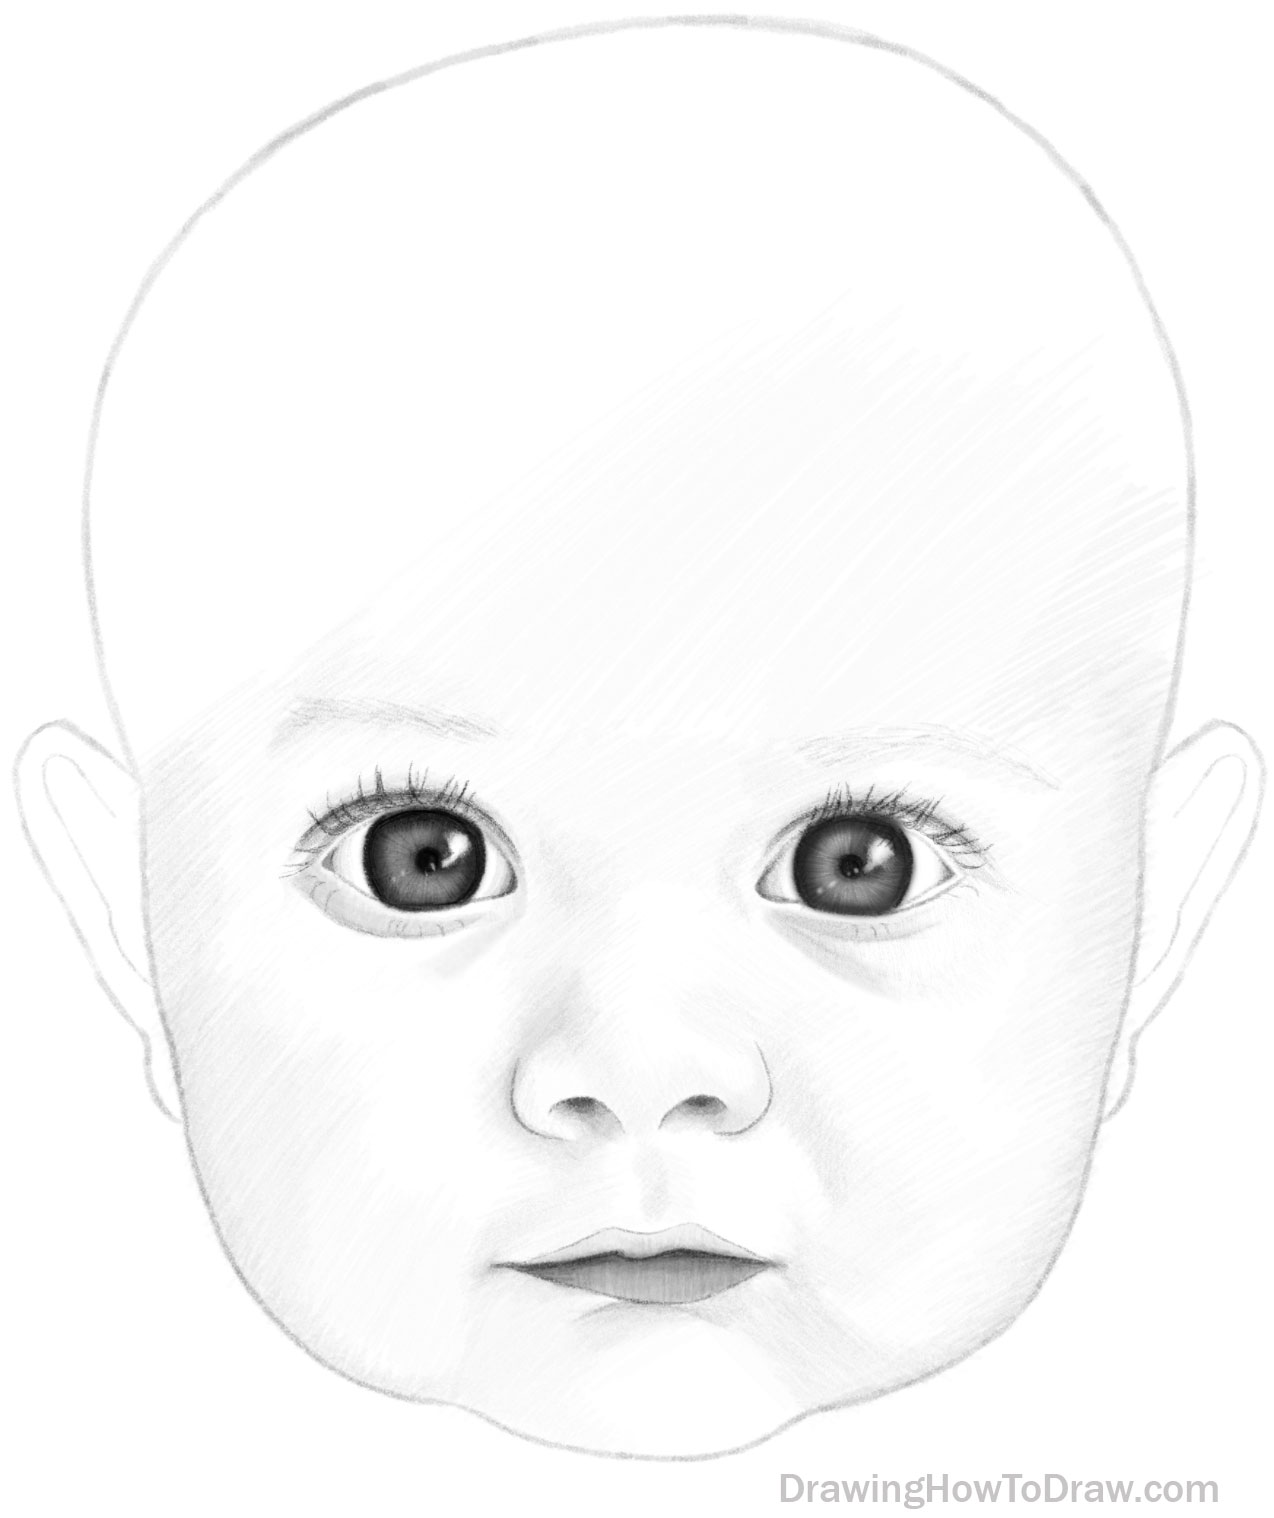 Baby Portrait Drawing from Photo - Graphite pencil, in Recent Artwork